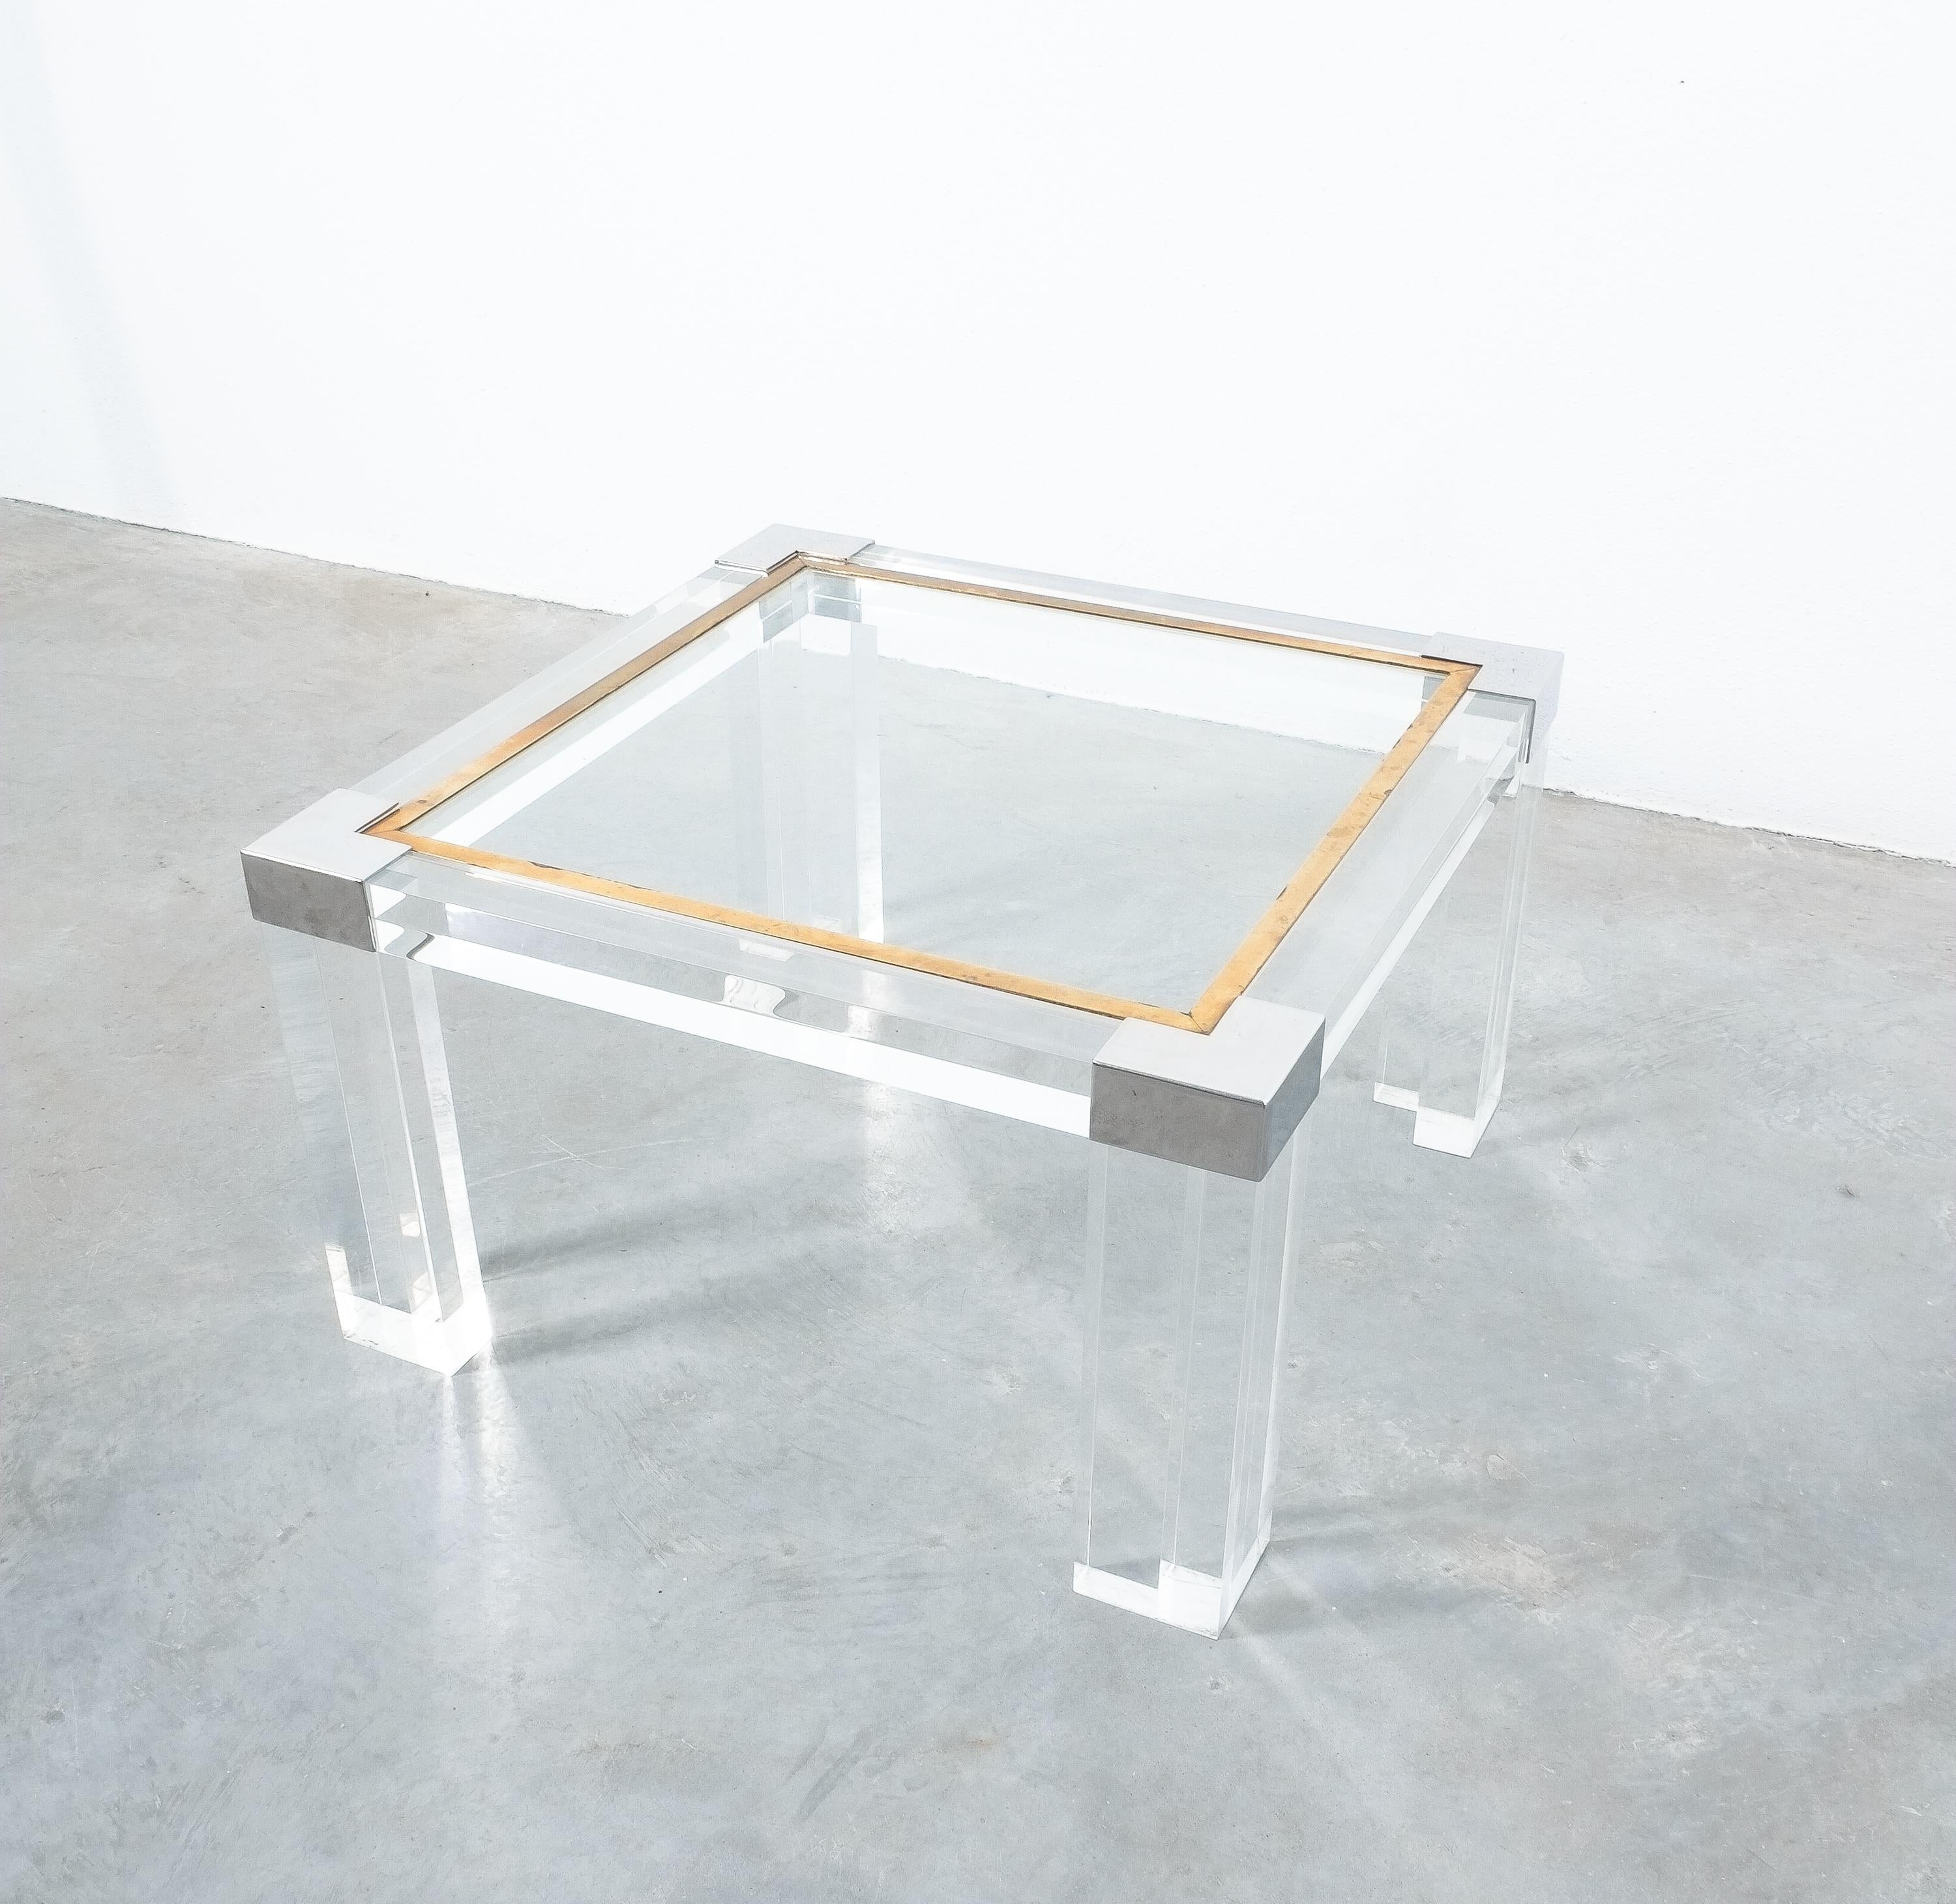 Lucite and brass coffee table style Charles Hollis Jones, circa 1970

Nicely sized 28 x 28 inch modernist Lucite coffee or cocktail table with a height of 16.14